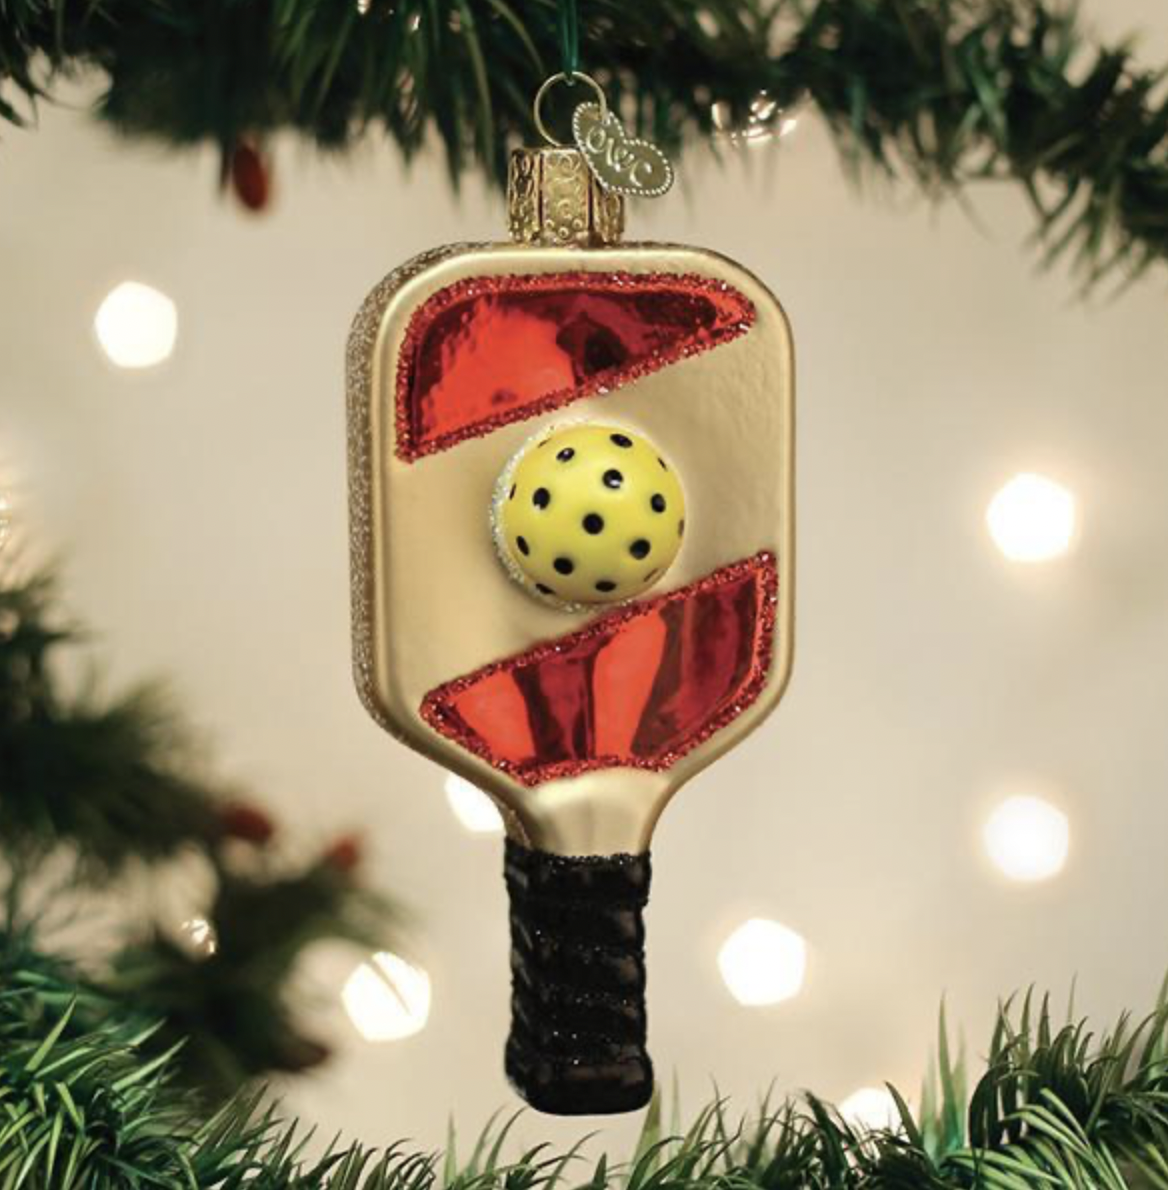 The 2022 Holiday Gift Guide for Tennis